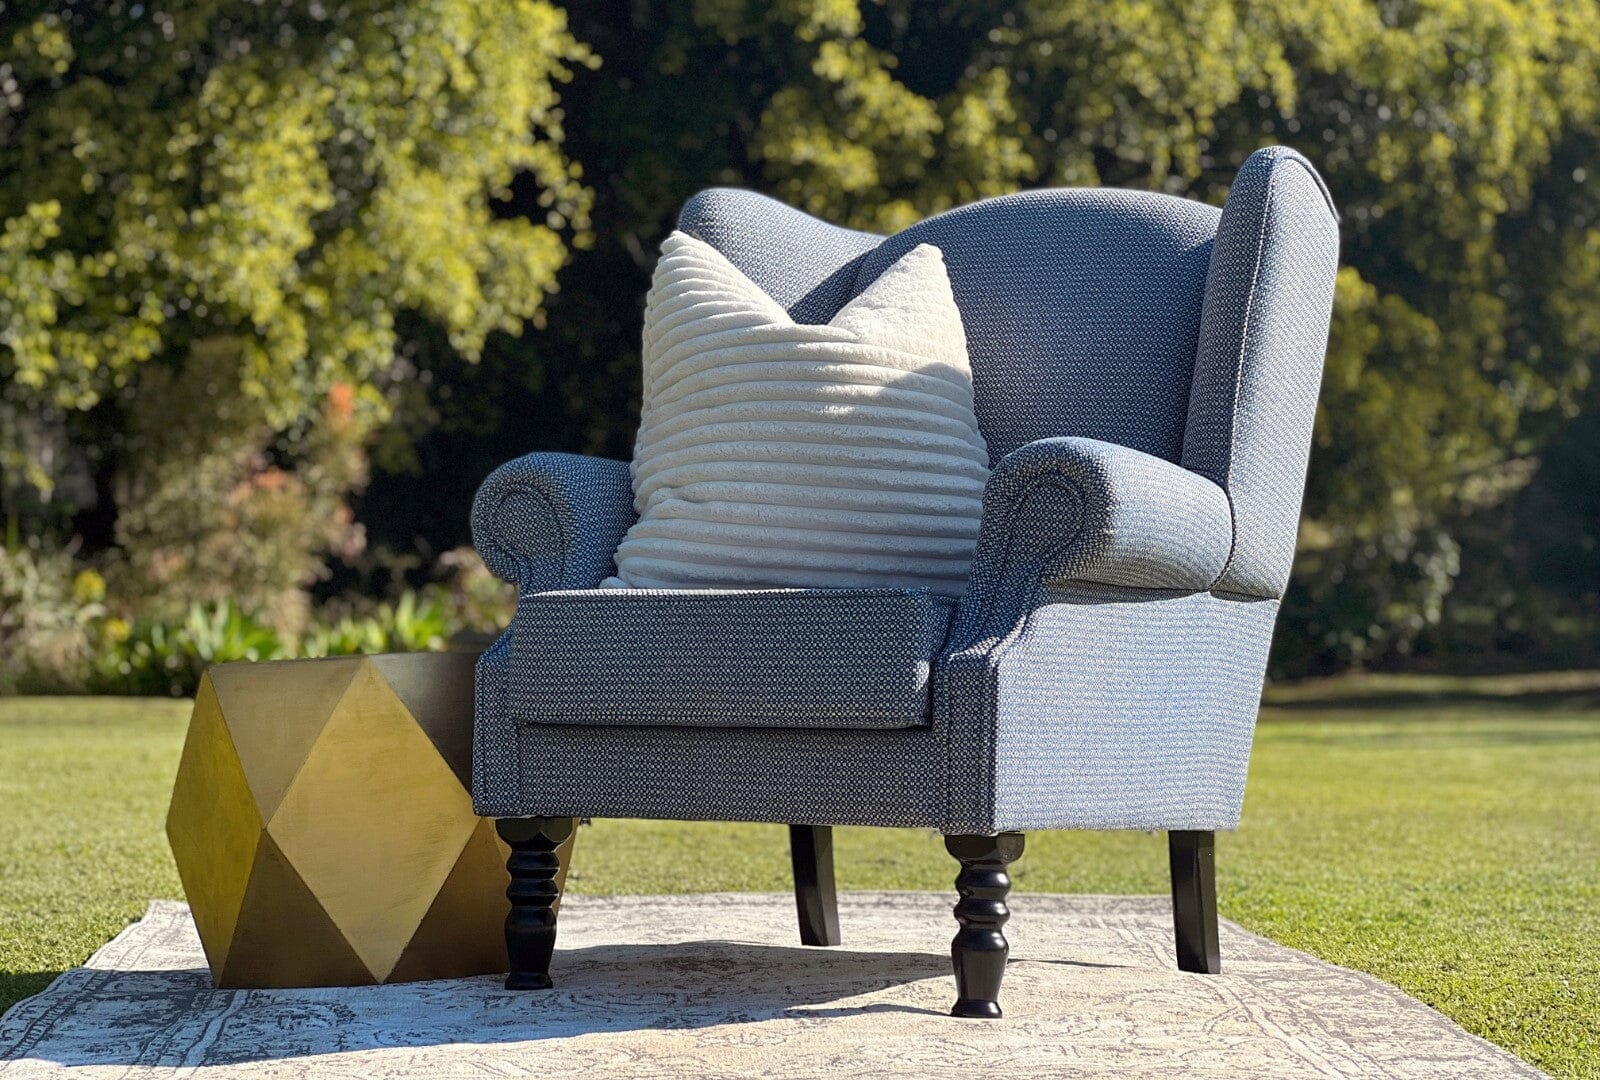 Factors to consider when choosing a Throne Chair for your next event